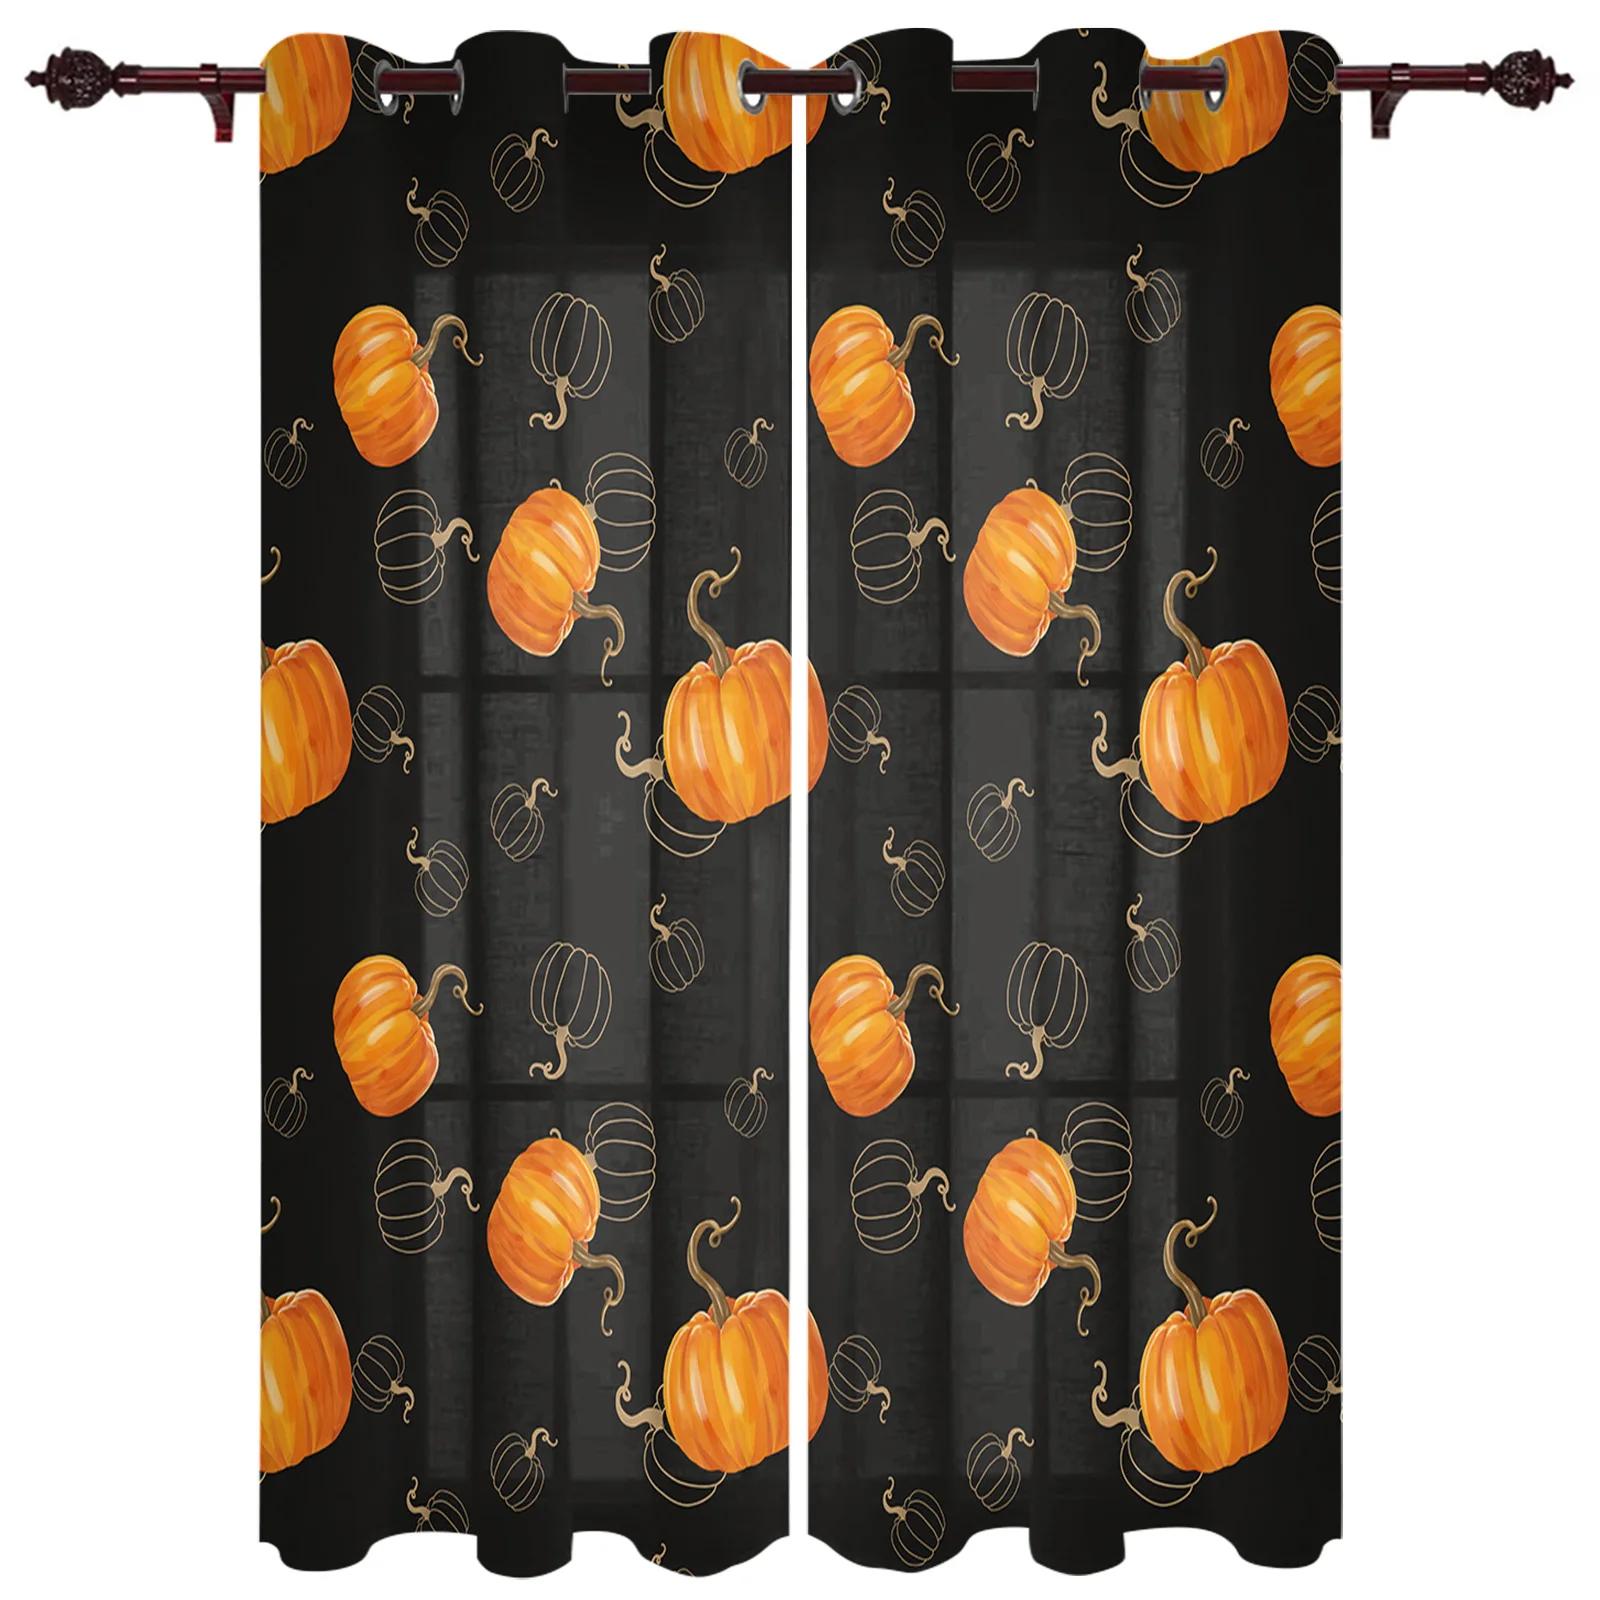 Pumpkin Autumn Simplicity Modern Curtains For Bedroom Cafe Home Decor Luxury Curtains In Living Room Balcony Window